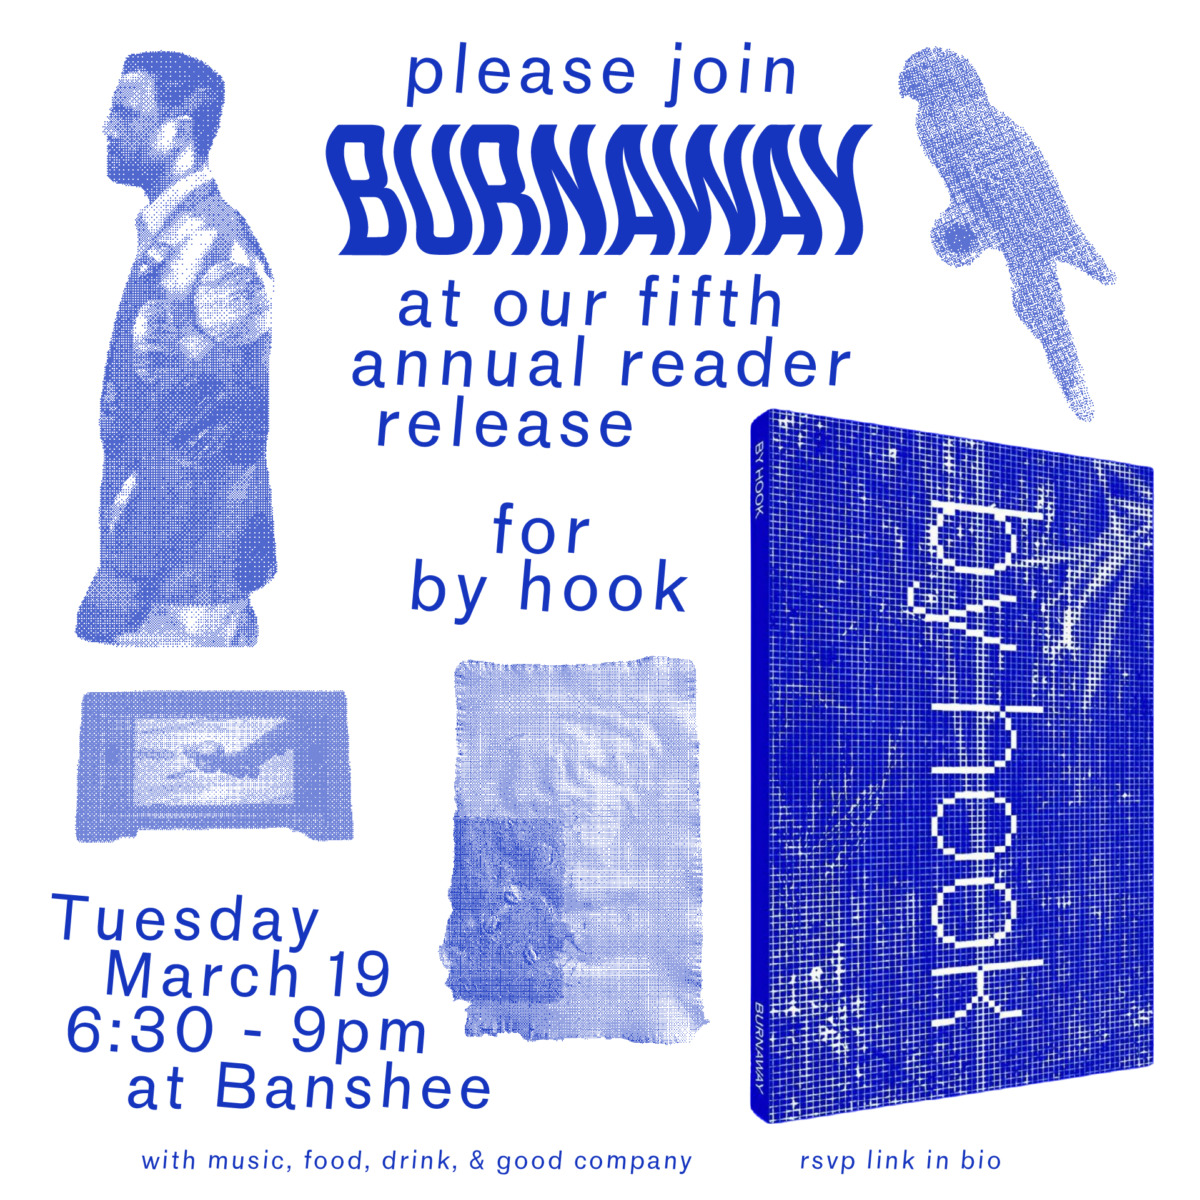 Flyer for Burnaway Reader by hook release party.